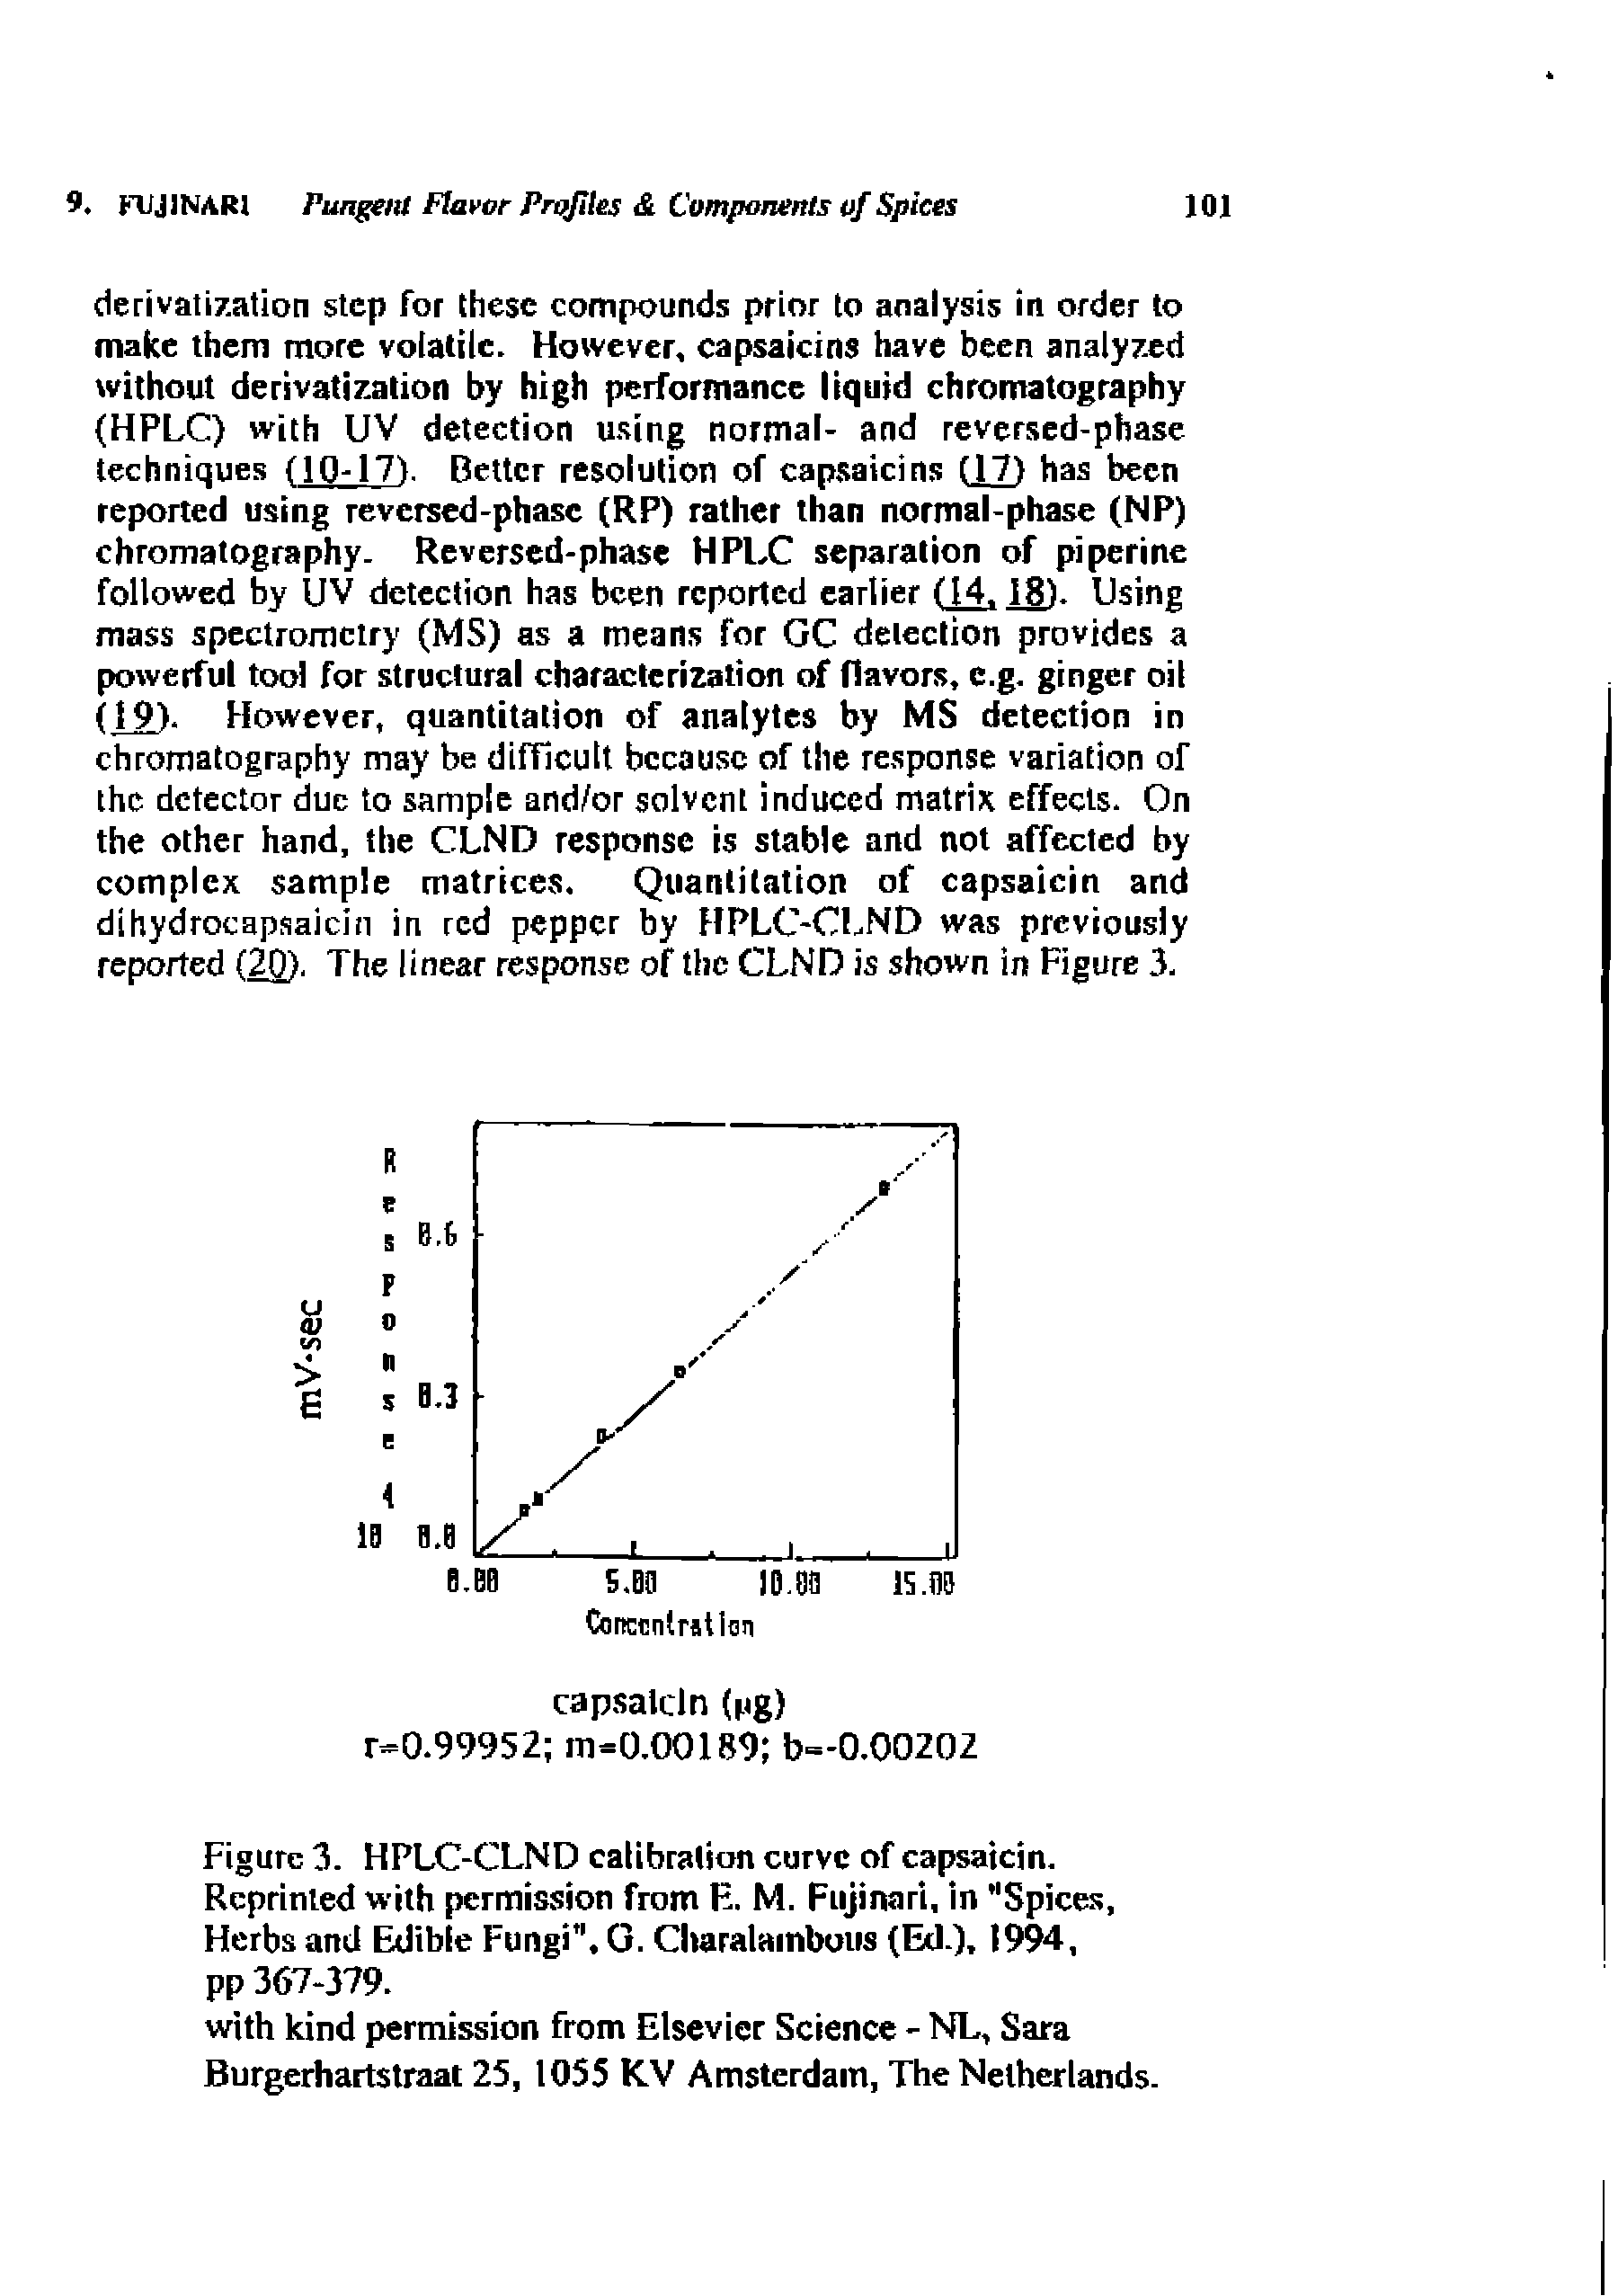 Figure 3. HPLC-CLND calibration curve of capsaicin. Reprinted with permission from K. M. Fujinari, in "Spices, Herbs and Edible Fungi", O. Charalambuus (Ed.), 1994, pp 367-379.